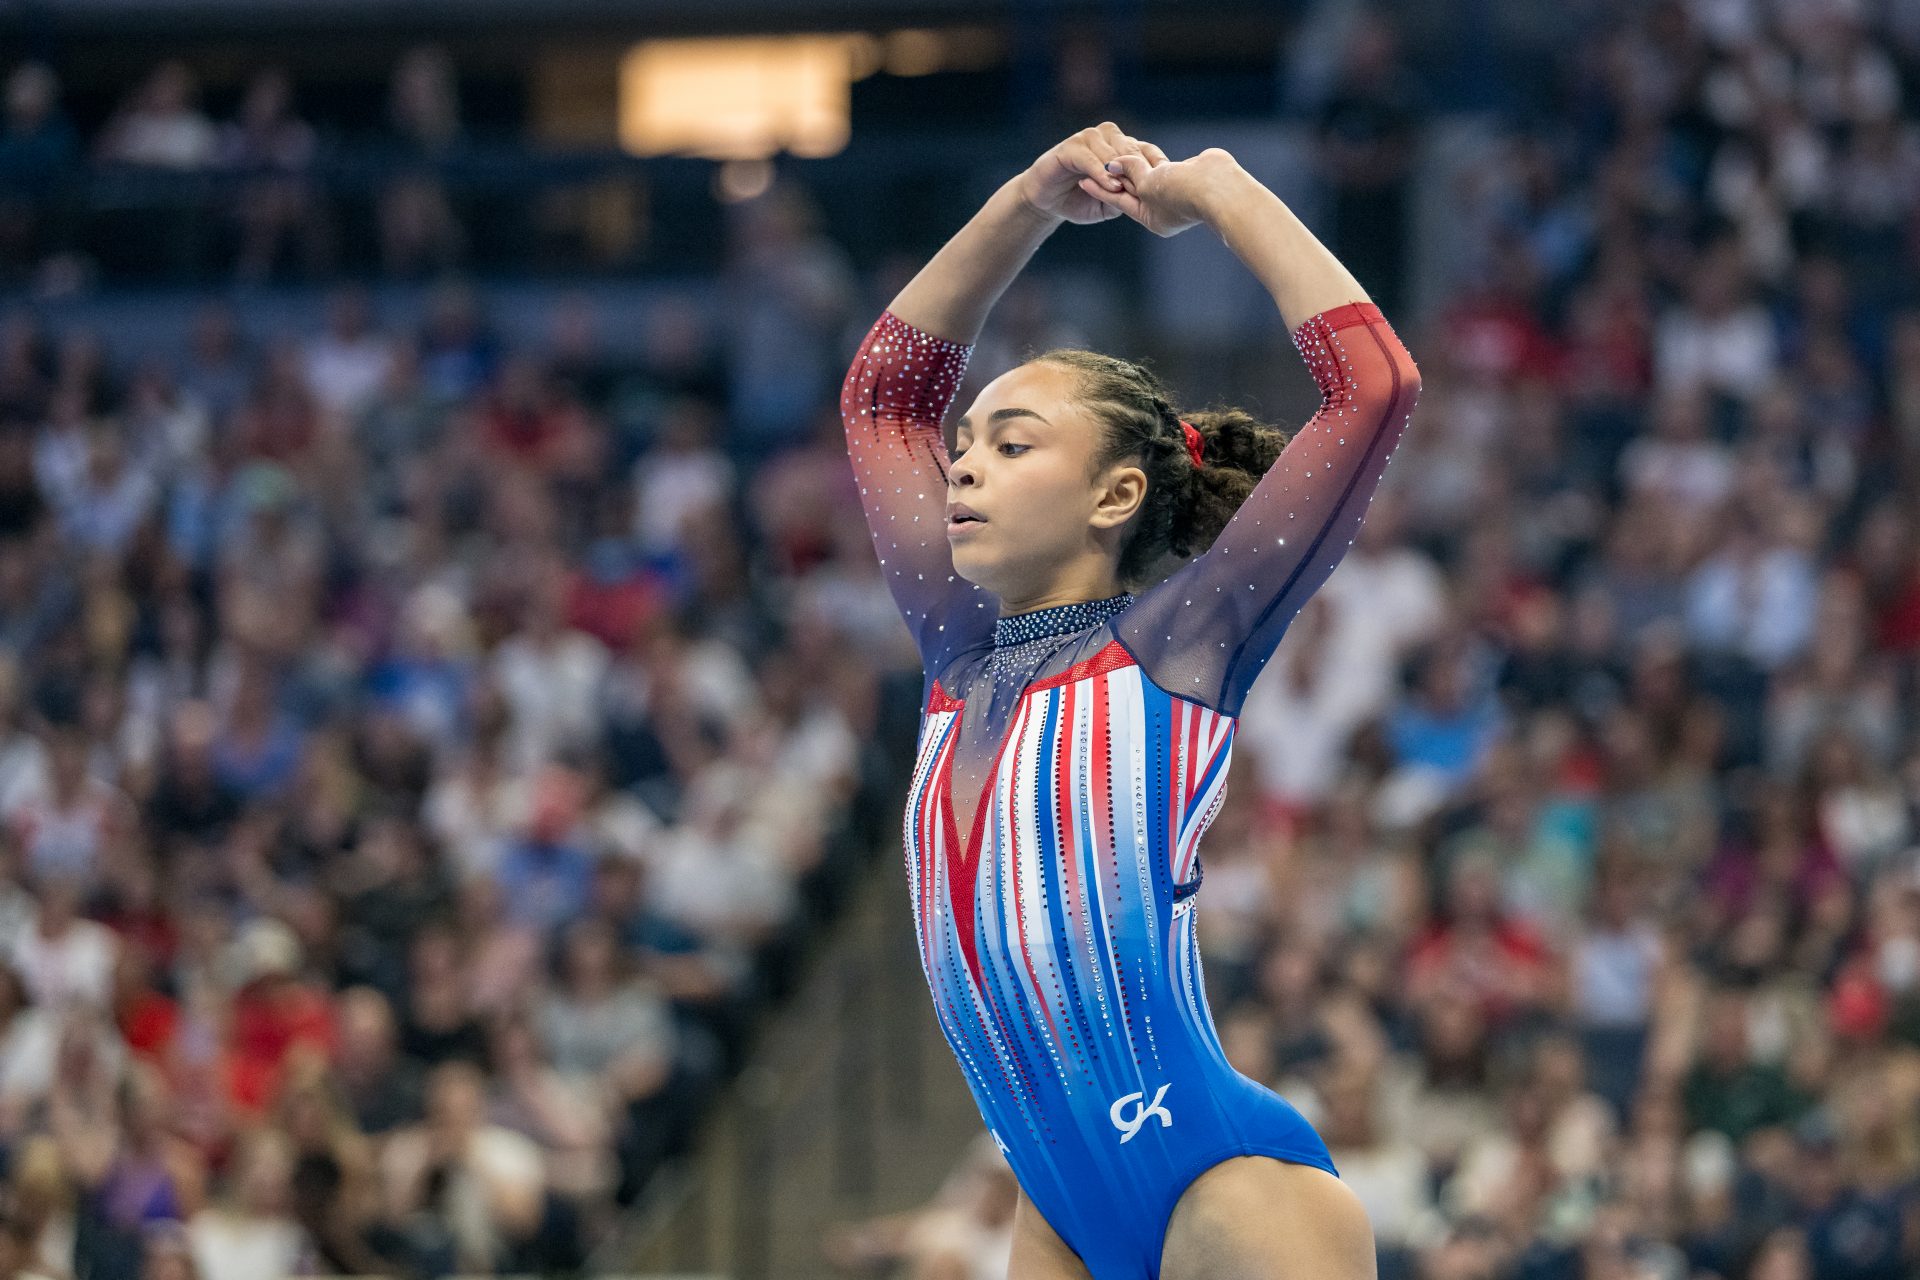 Hezly Rivera: The next superstar in US Gymnastics to take over Simone Biles